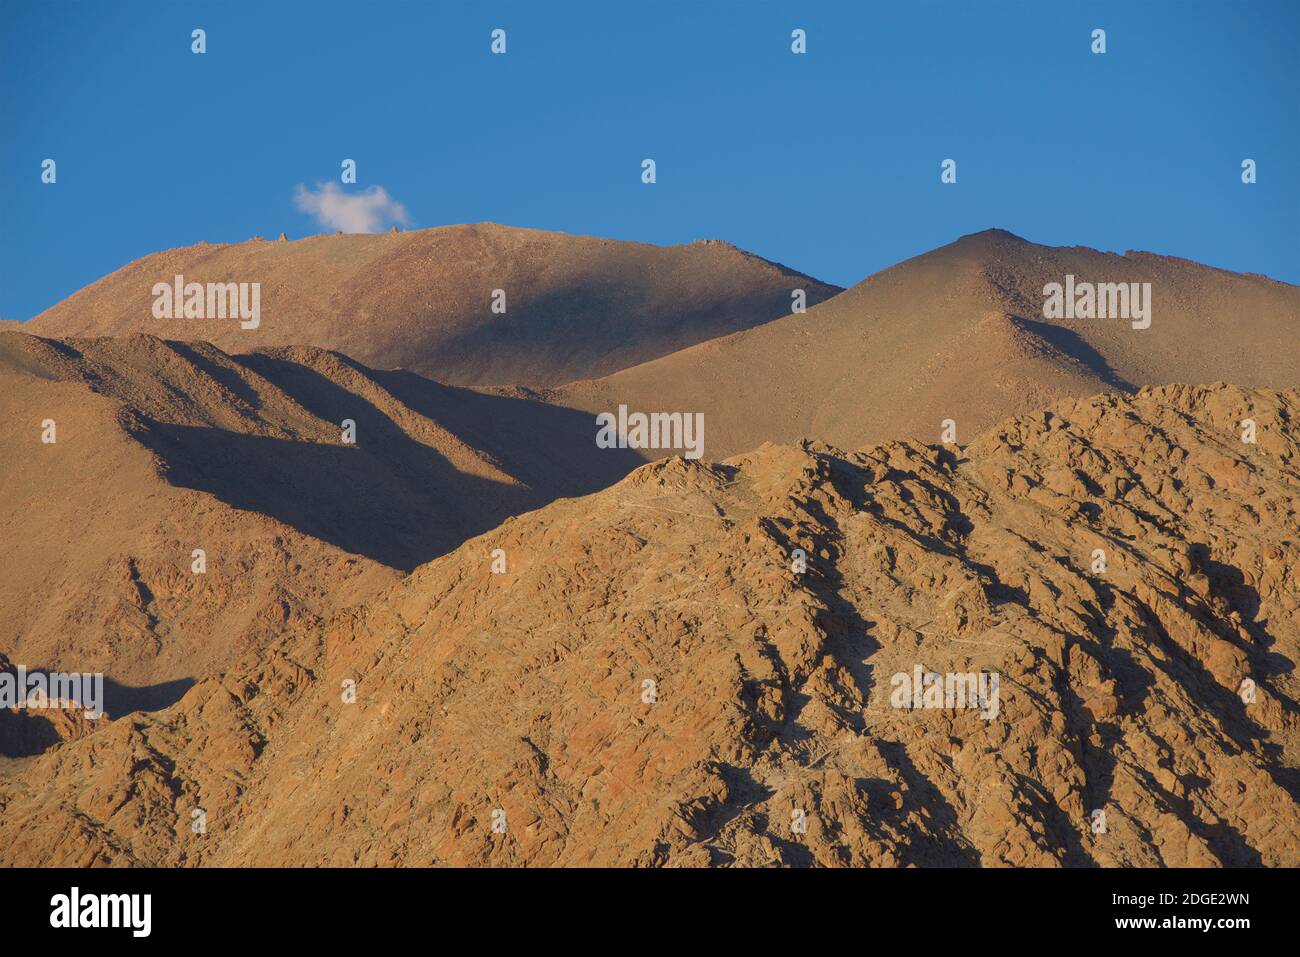 Late afternoon view of the landscape surrounding the Shanti Stupa at Chanspa, Leh district, Ladakh, Jammu and Kashmir, India in July Stock Photo